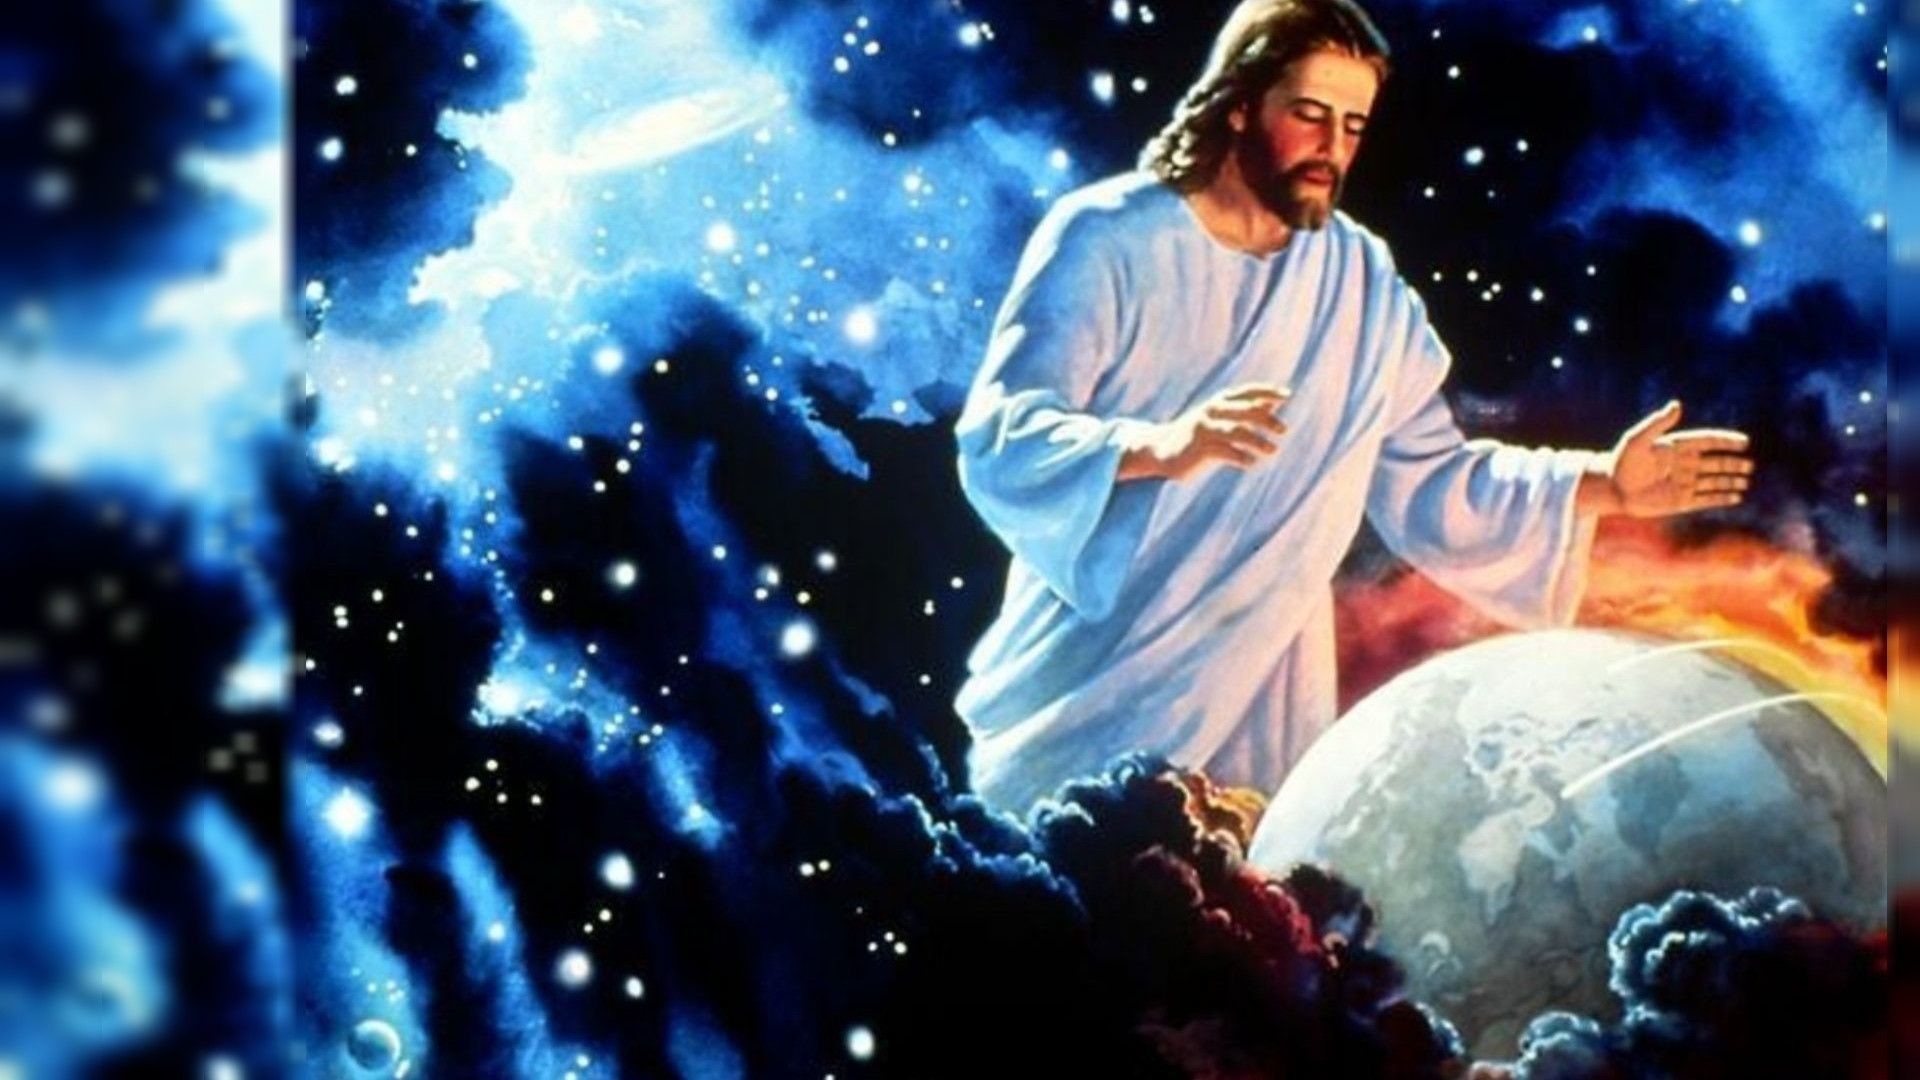 1920x1080 0 1280x1714 1080p HD Wallpaper  Cool 3D Wallpaper Jesus, Images  Collection of 3D Jesus nNO513